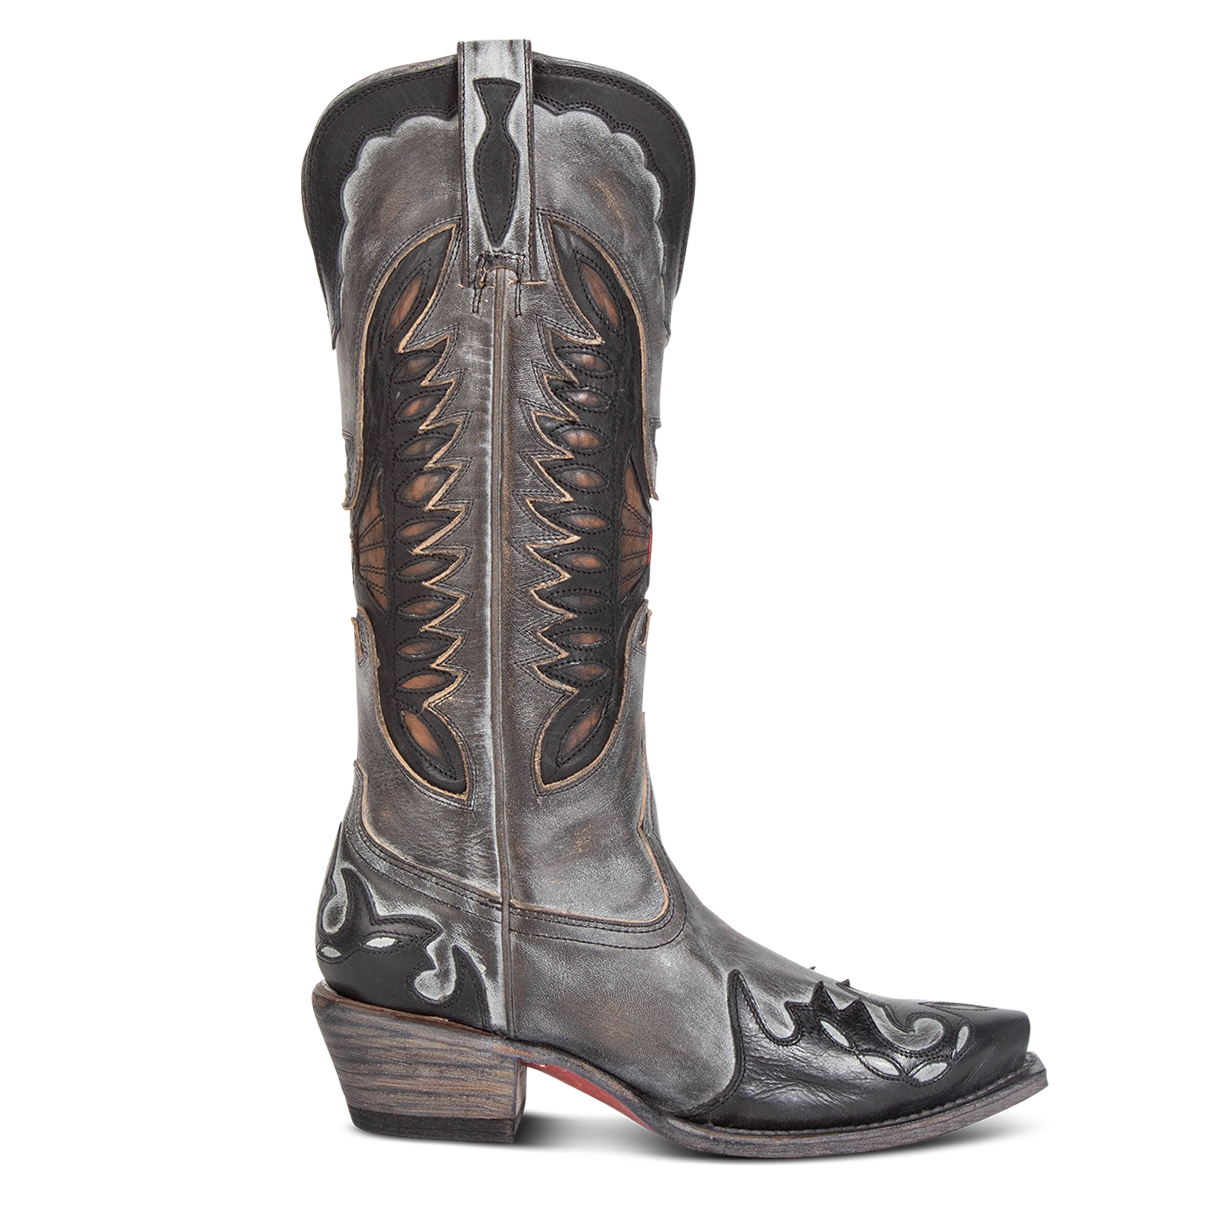 FREEBIRD women's Willie ice multi leather western boot with textured design, stitch detailing, and snip toe construction